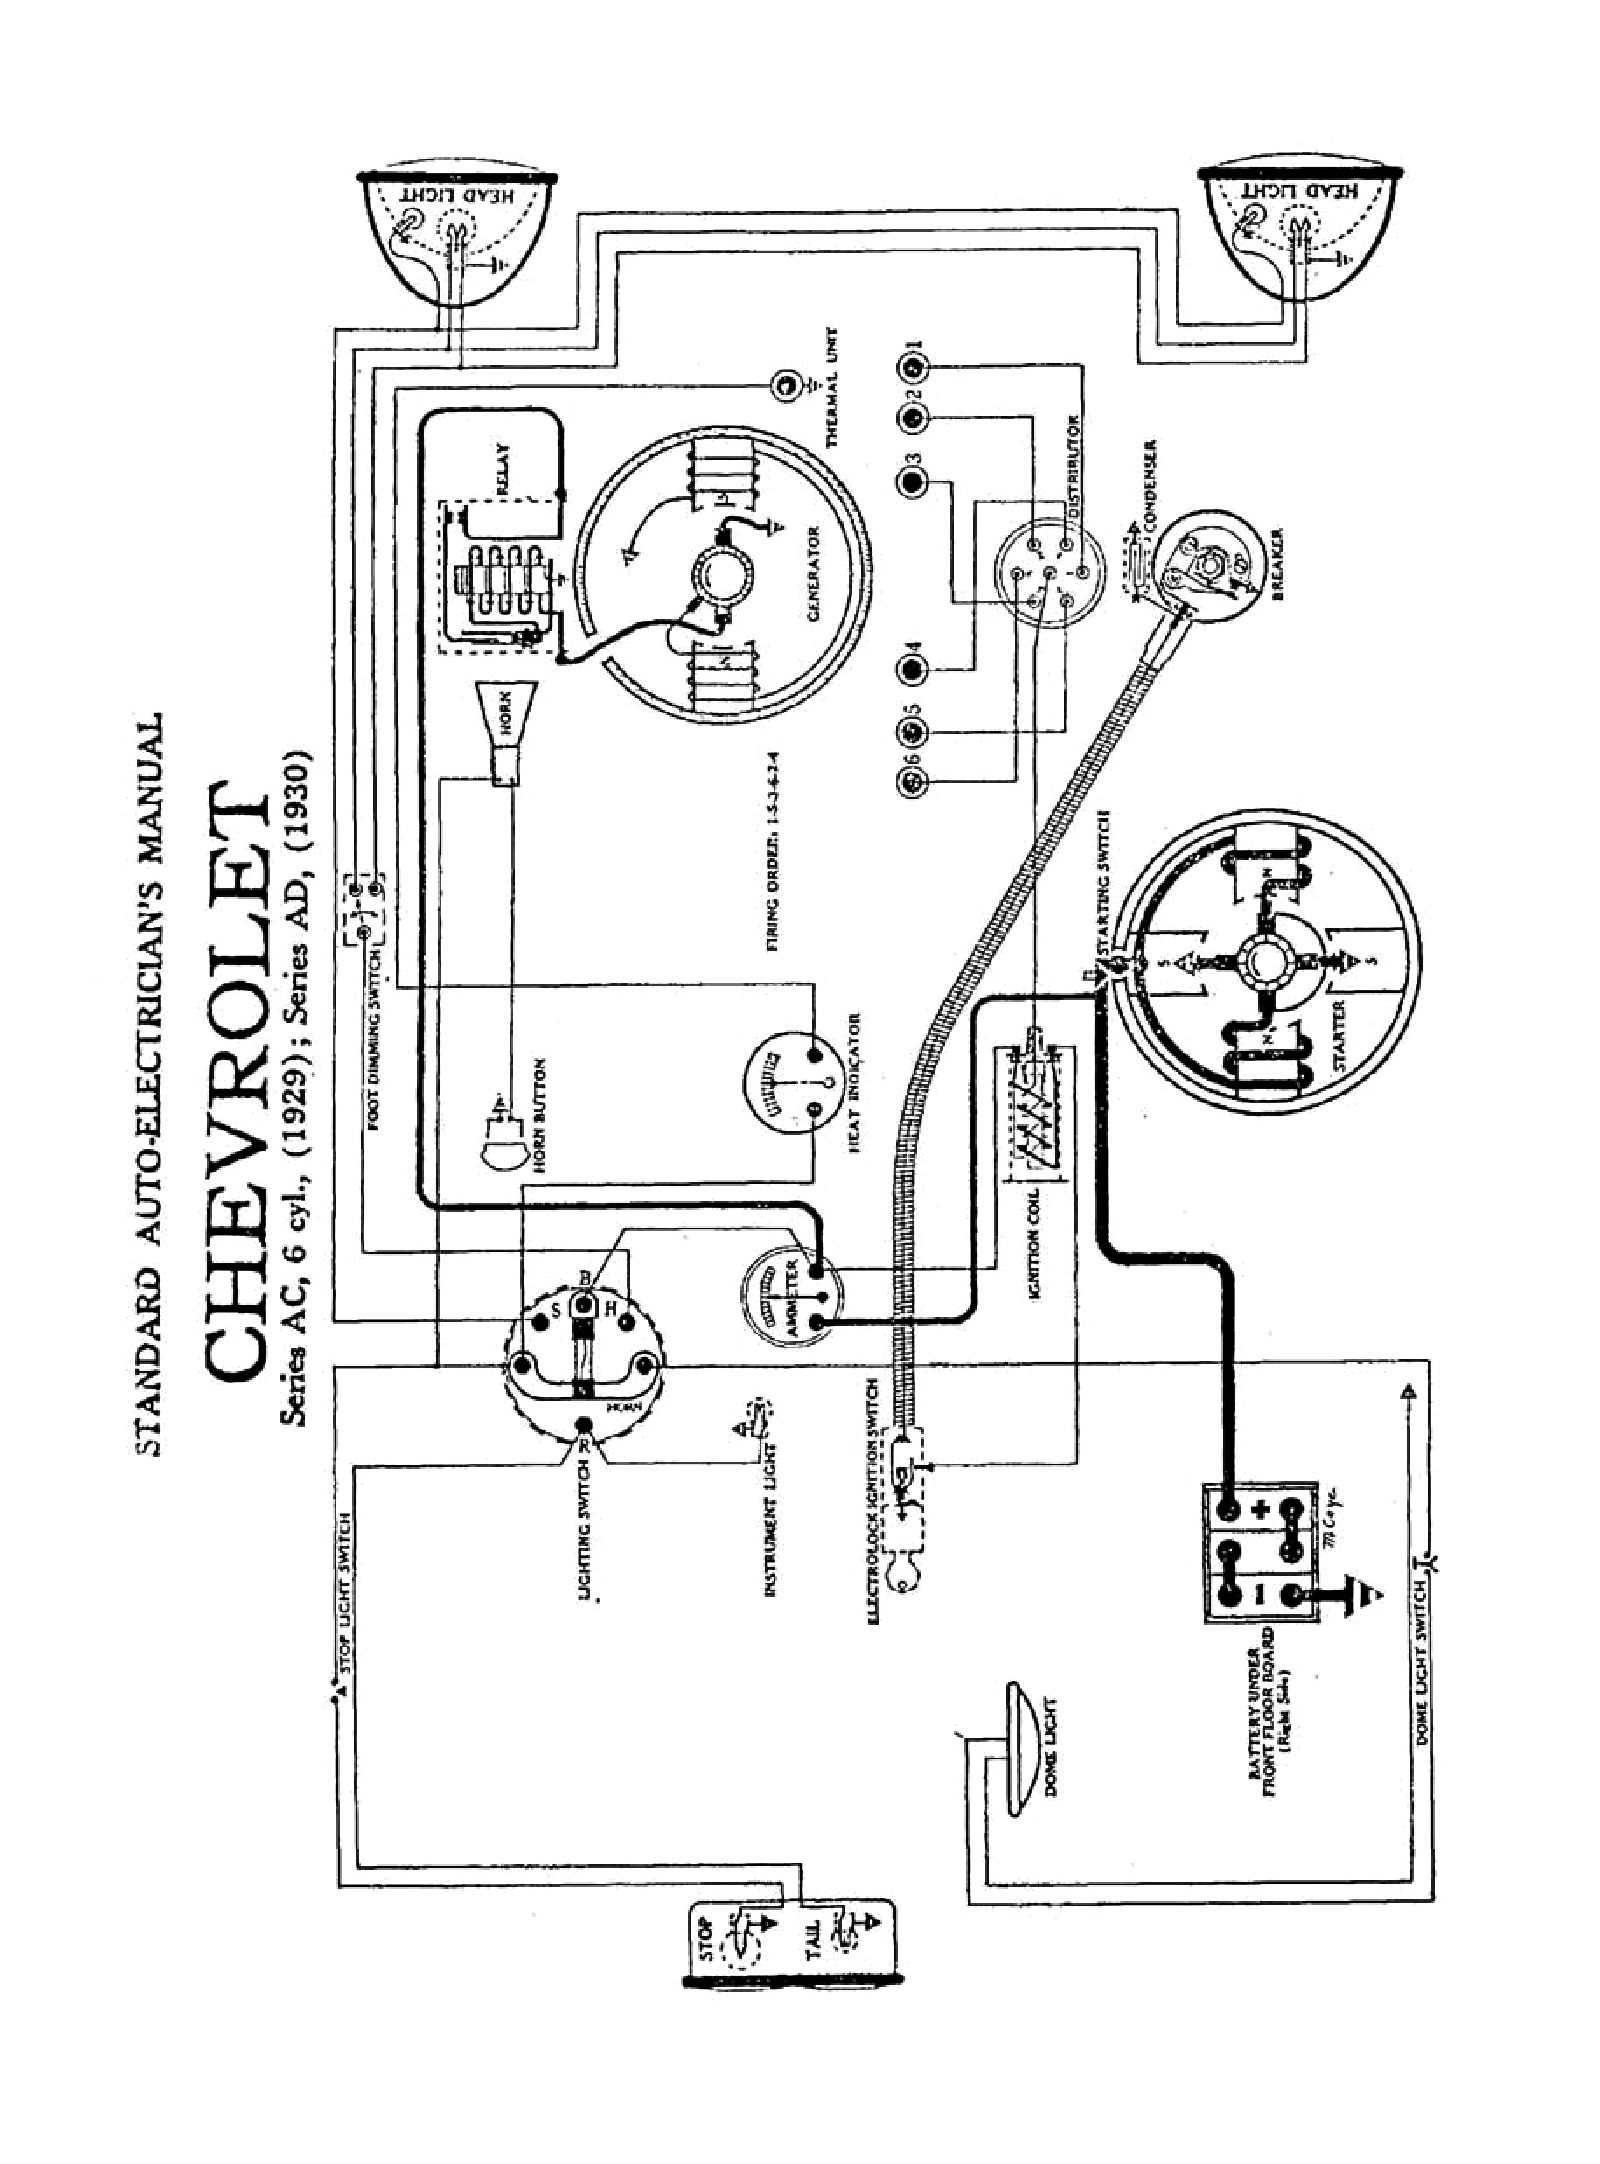 1949 Chev Wiring | Wiring Diagram - Mercury Outboard Ignition Switch Wiring Diagram